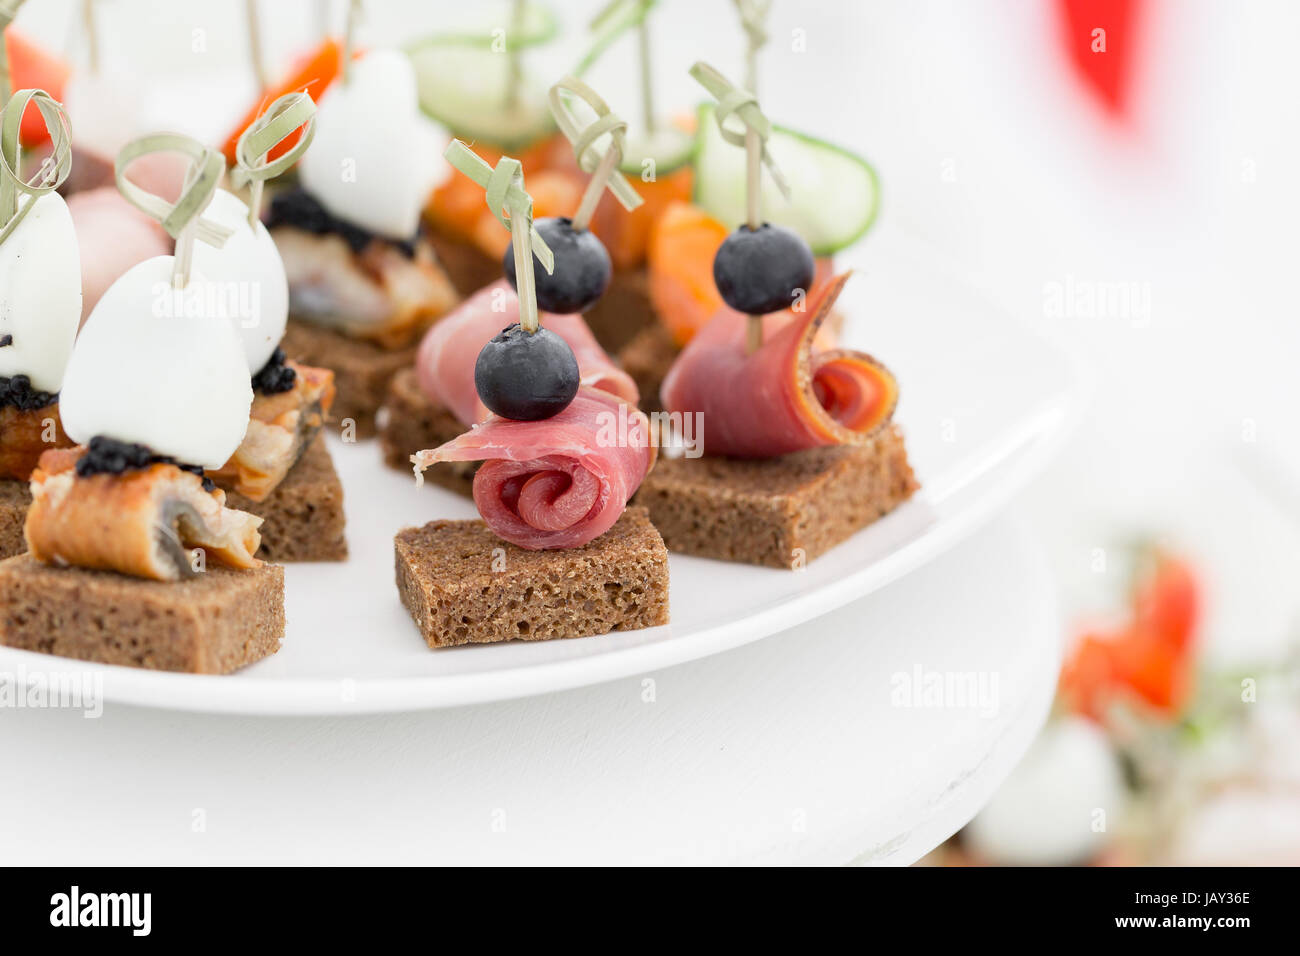 the buffet at the reception. Assortment of canapes. Banquet service. catering food Stock Photo